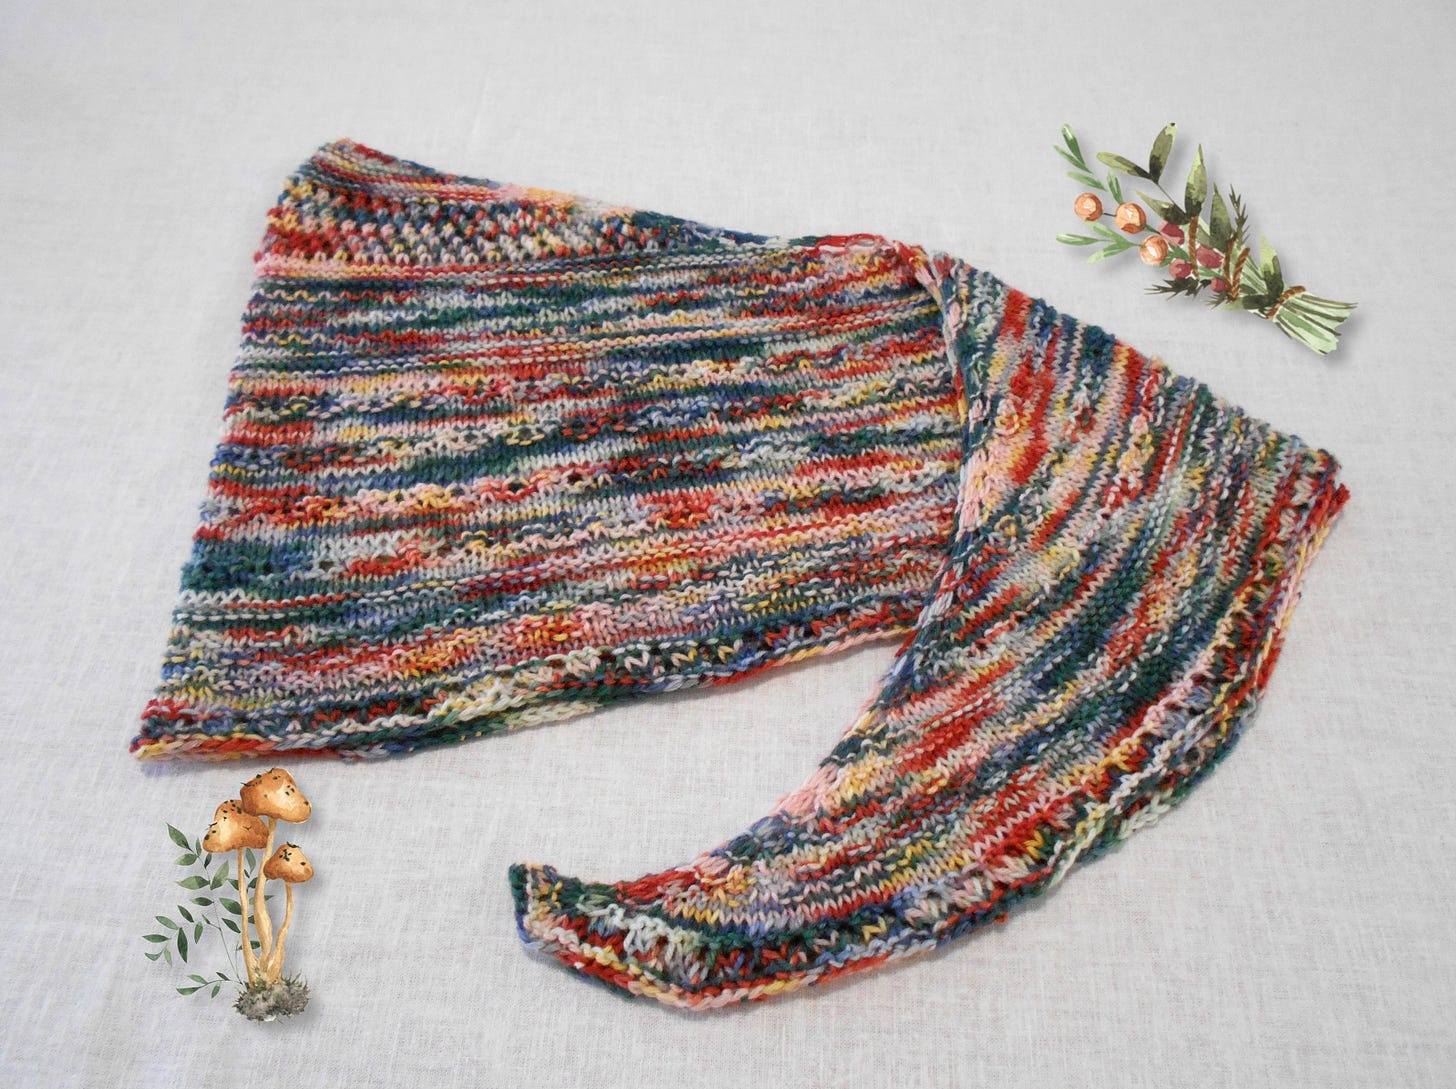 A handknitted shawl in autumn colours